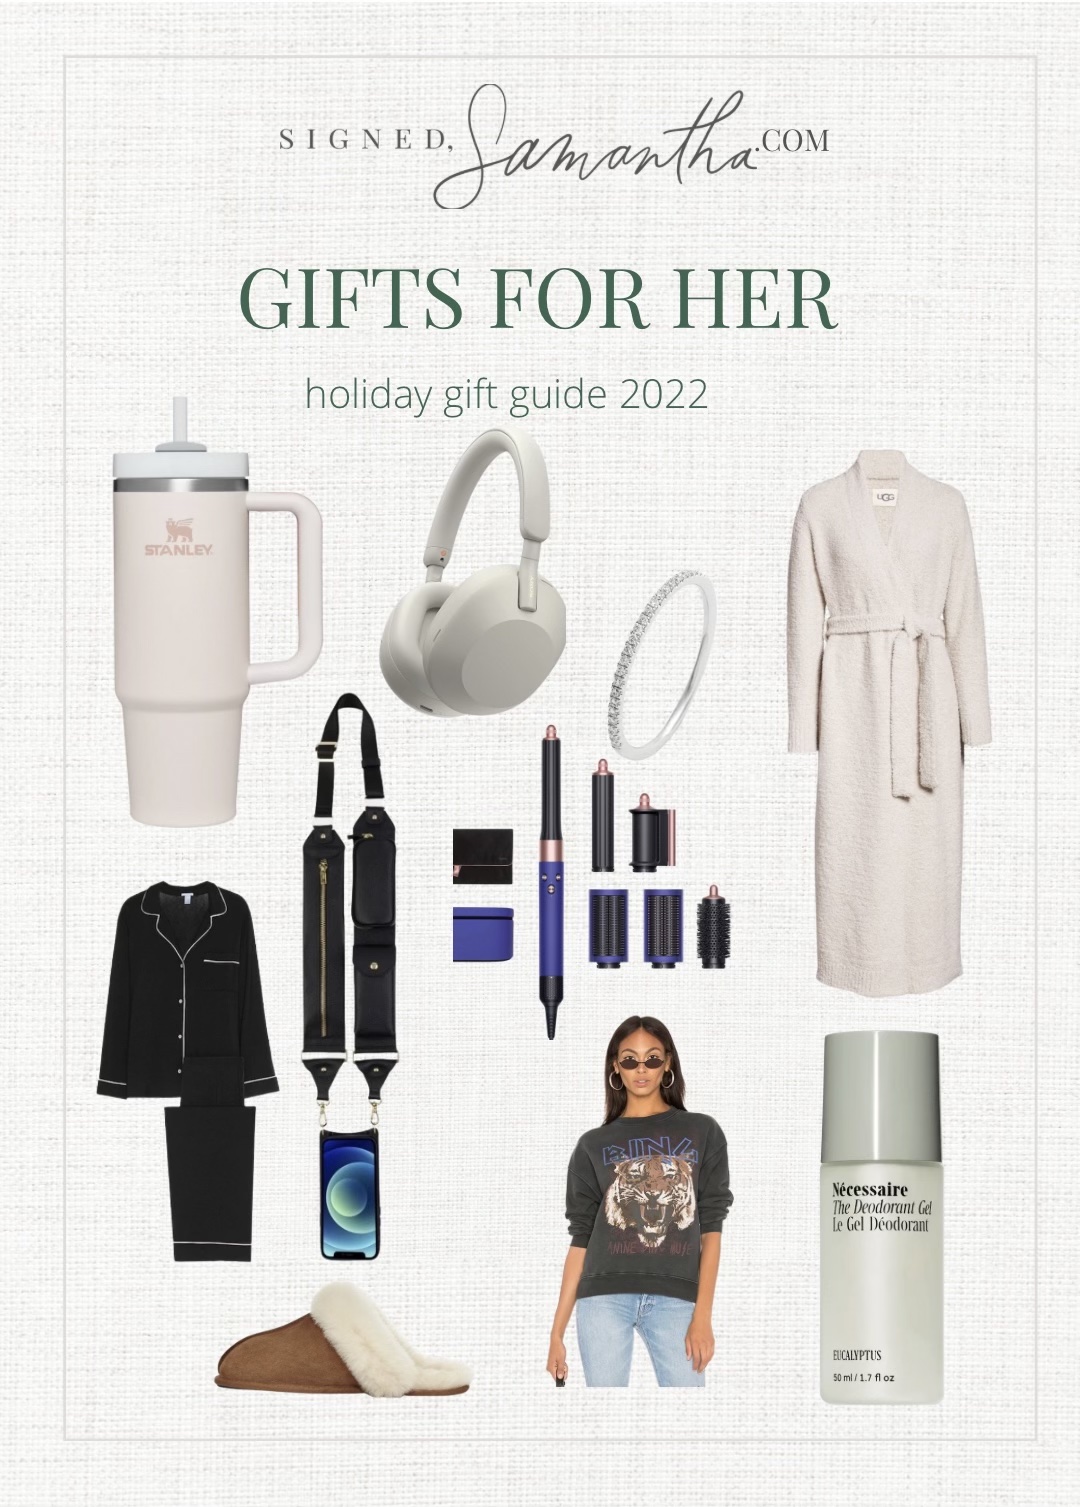 2022 holiday gift guide for her by Signed Samantha